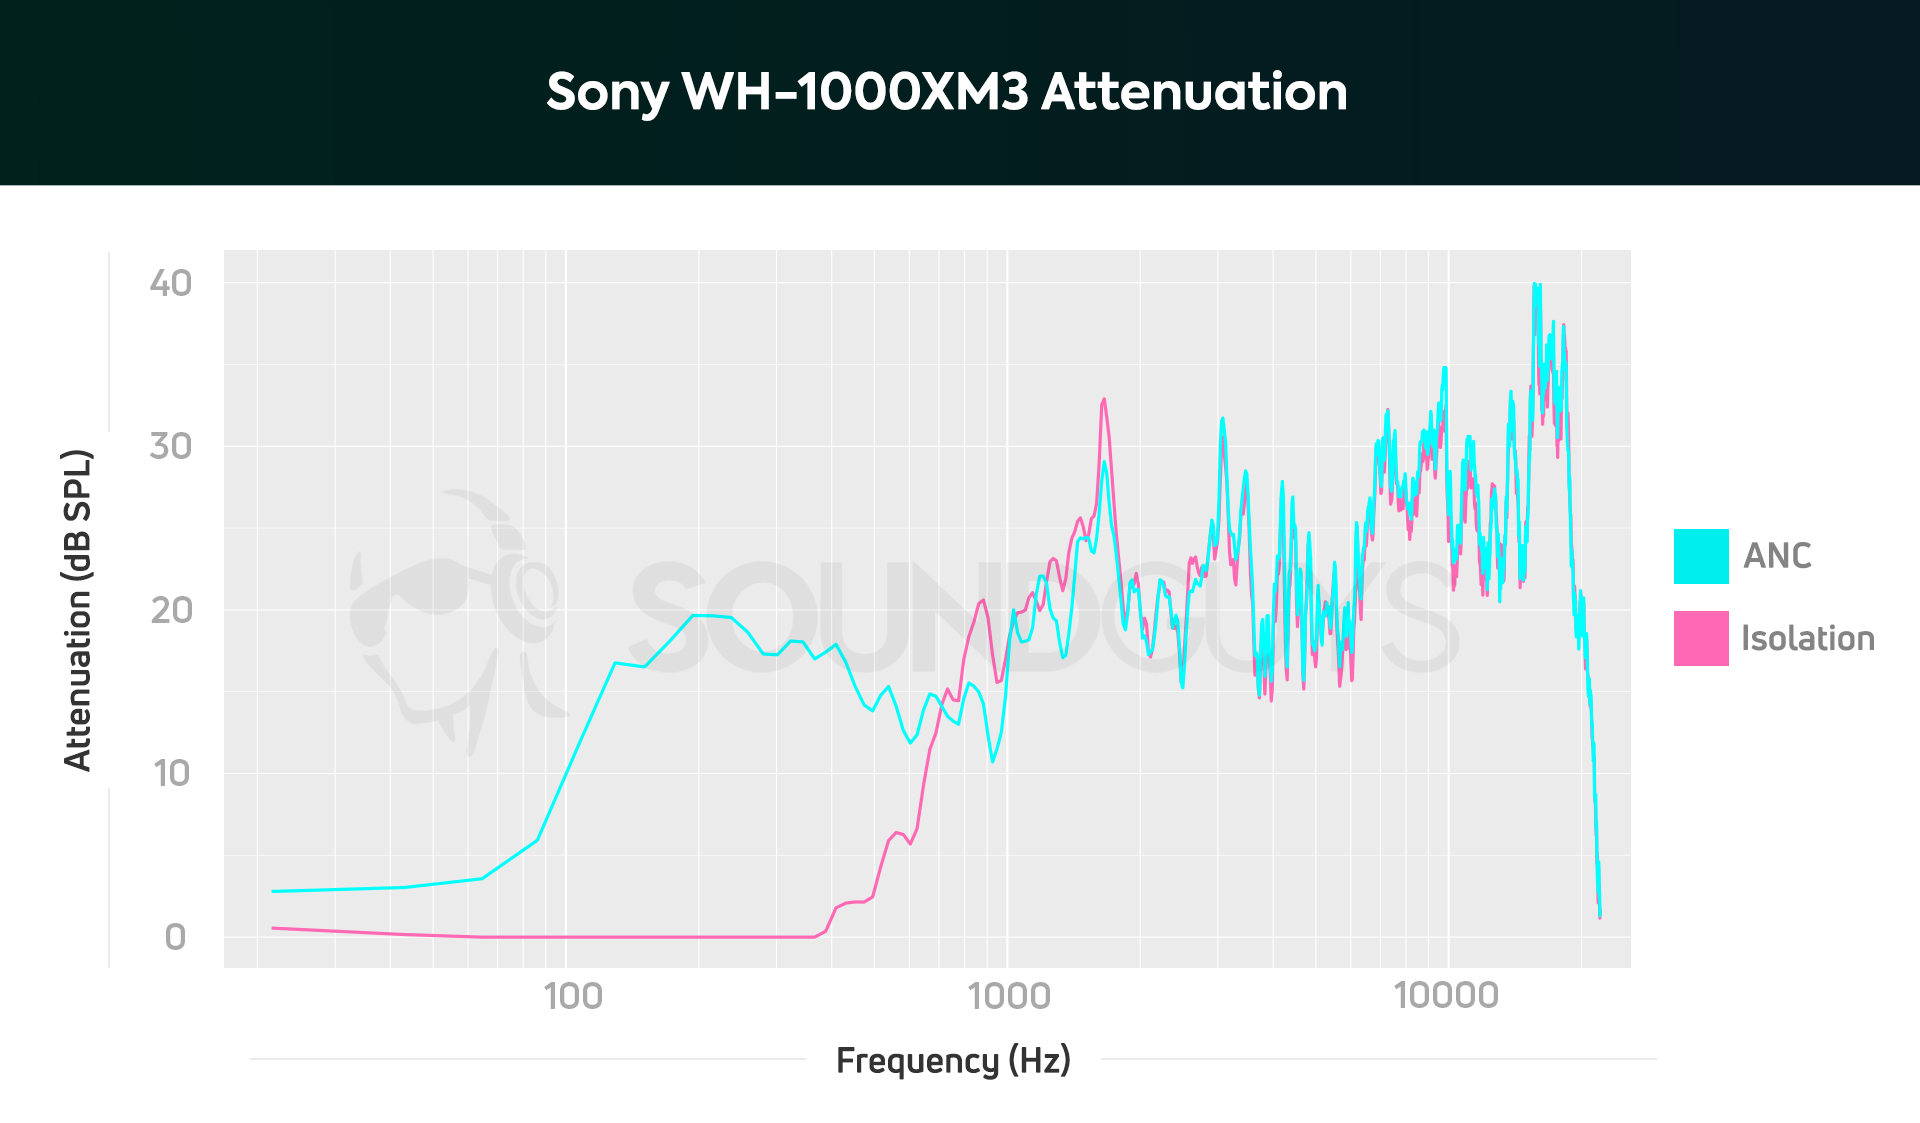 A chart of the Sony WH-1000XM3 noise cancelling and passive isolation performance.